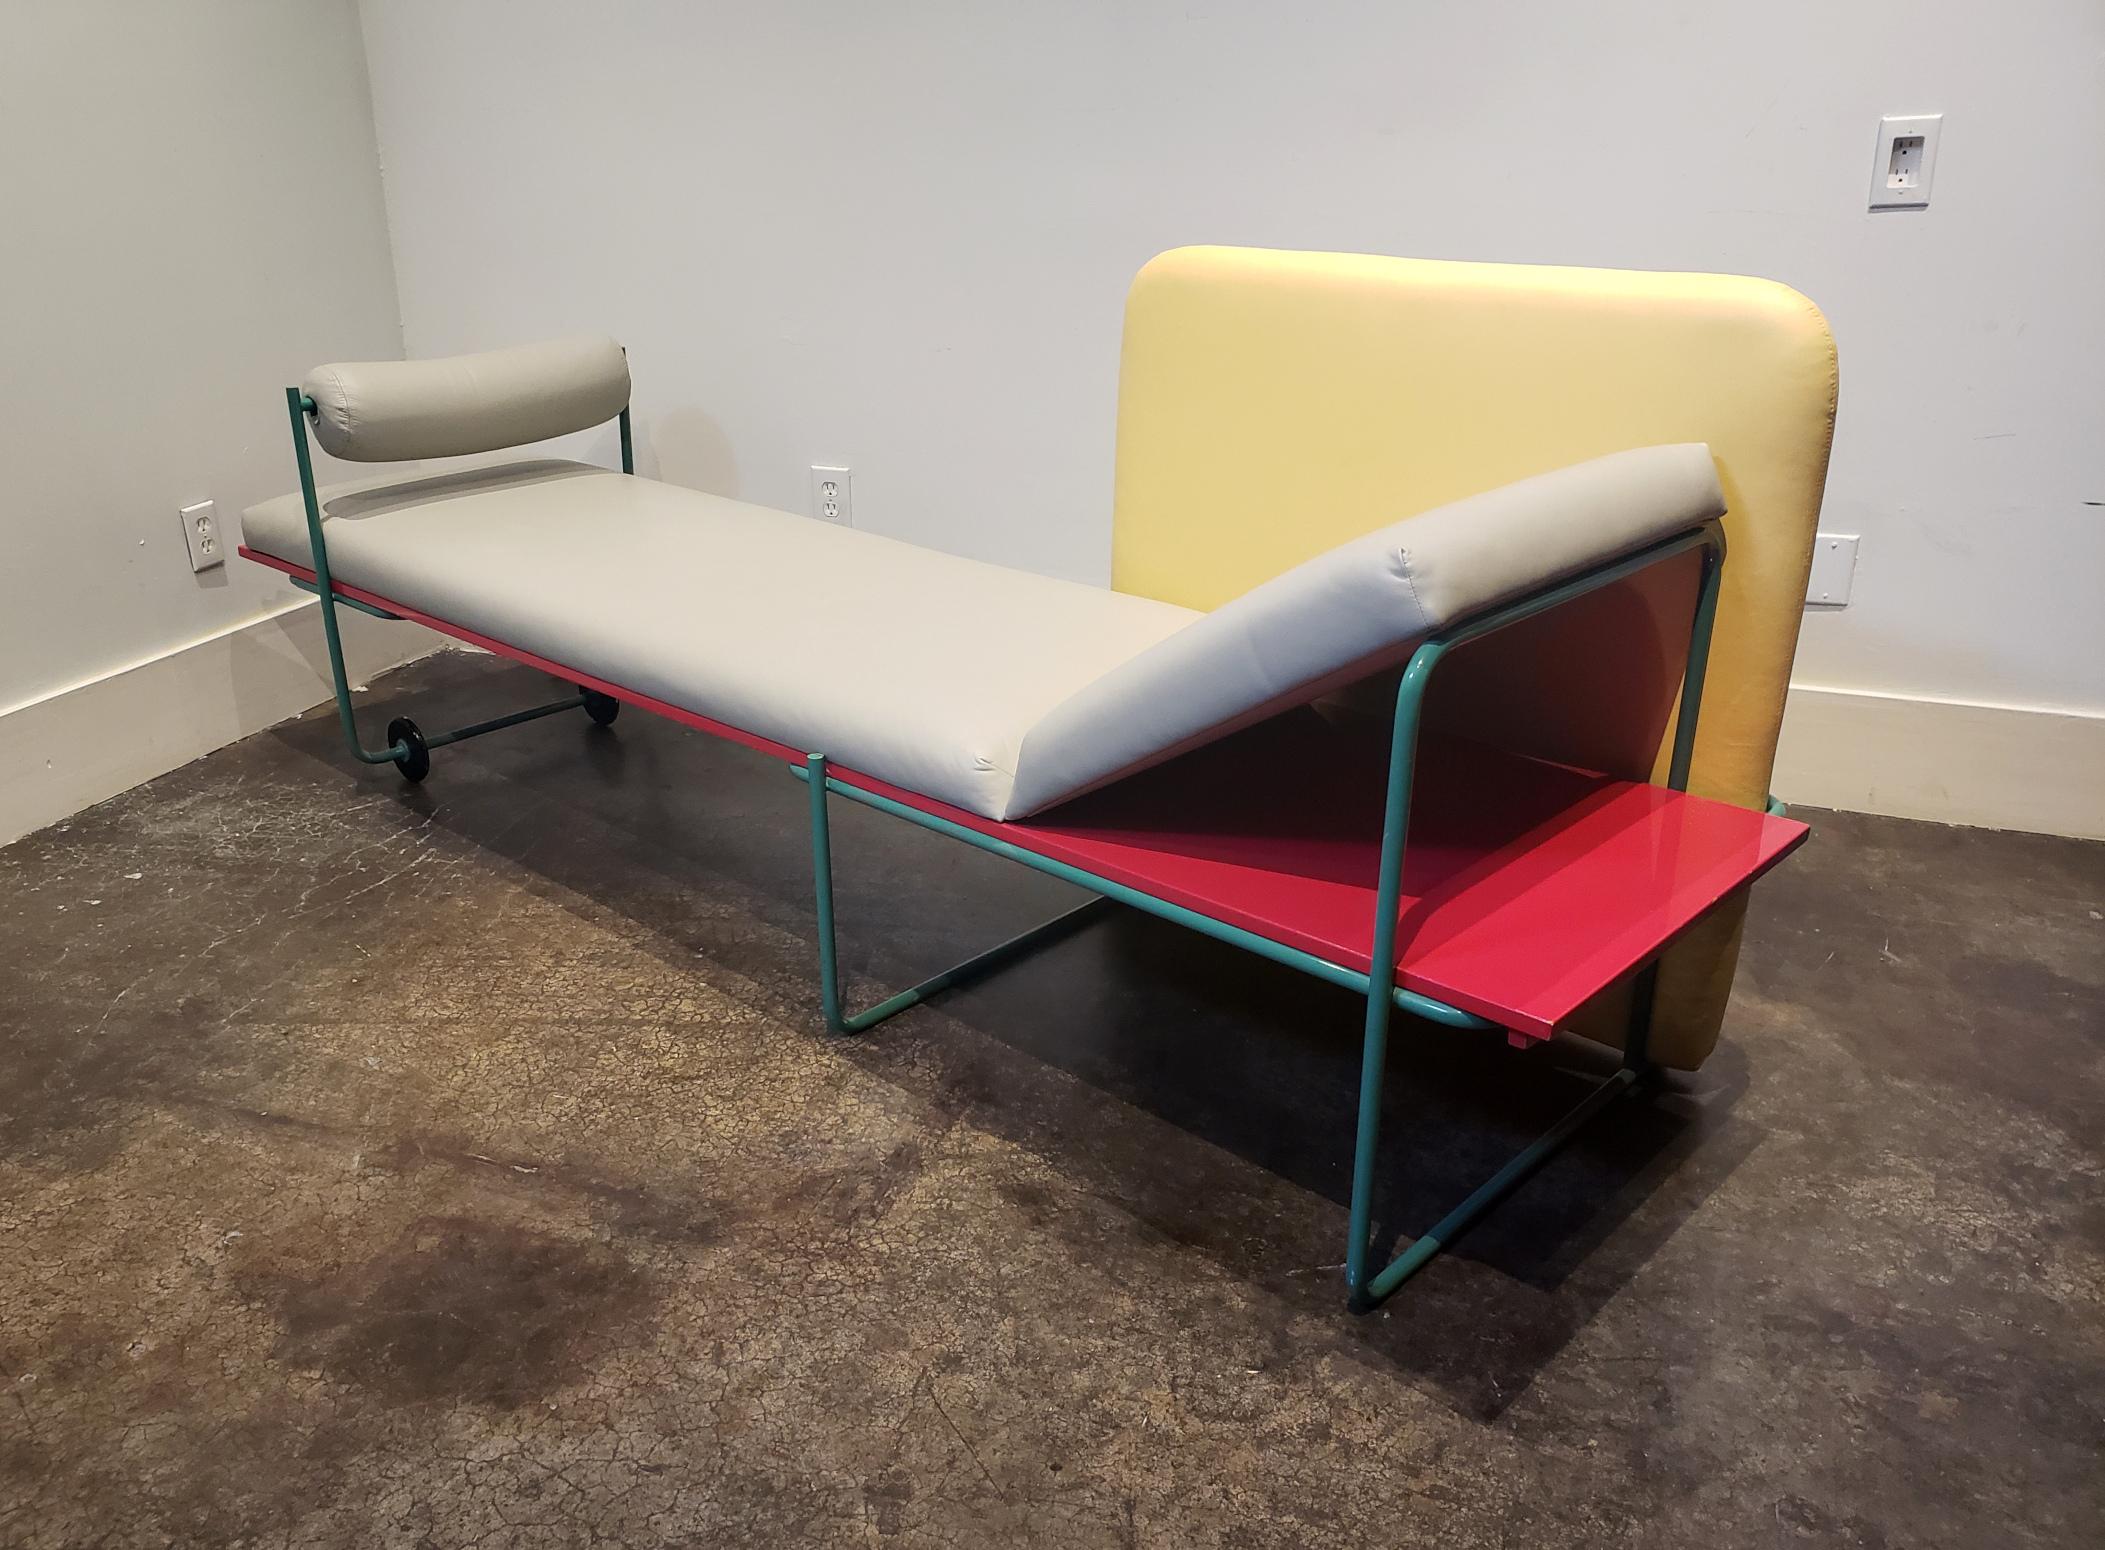 Very rare Memphis Milano sofa designed by Andea Branzi in 1982. Lacquered wood in red, lacquered metal in green, gray and yellow leather upholstery. Chaise can be rolled on wheels and the head rest on the right can be raised or laid